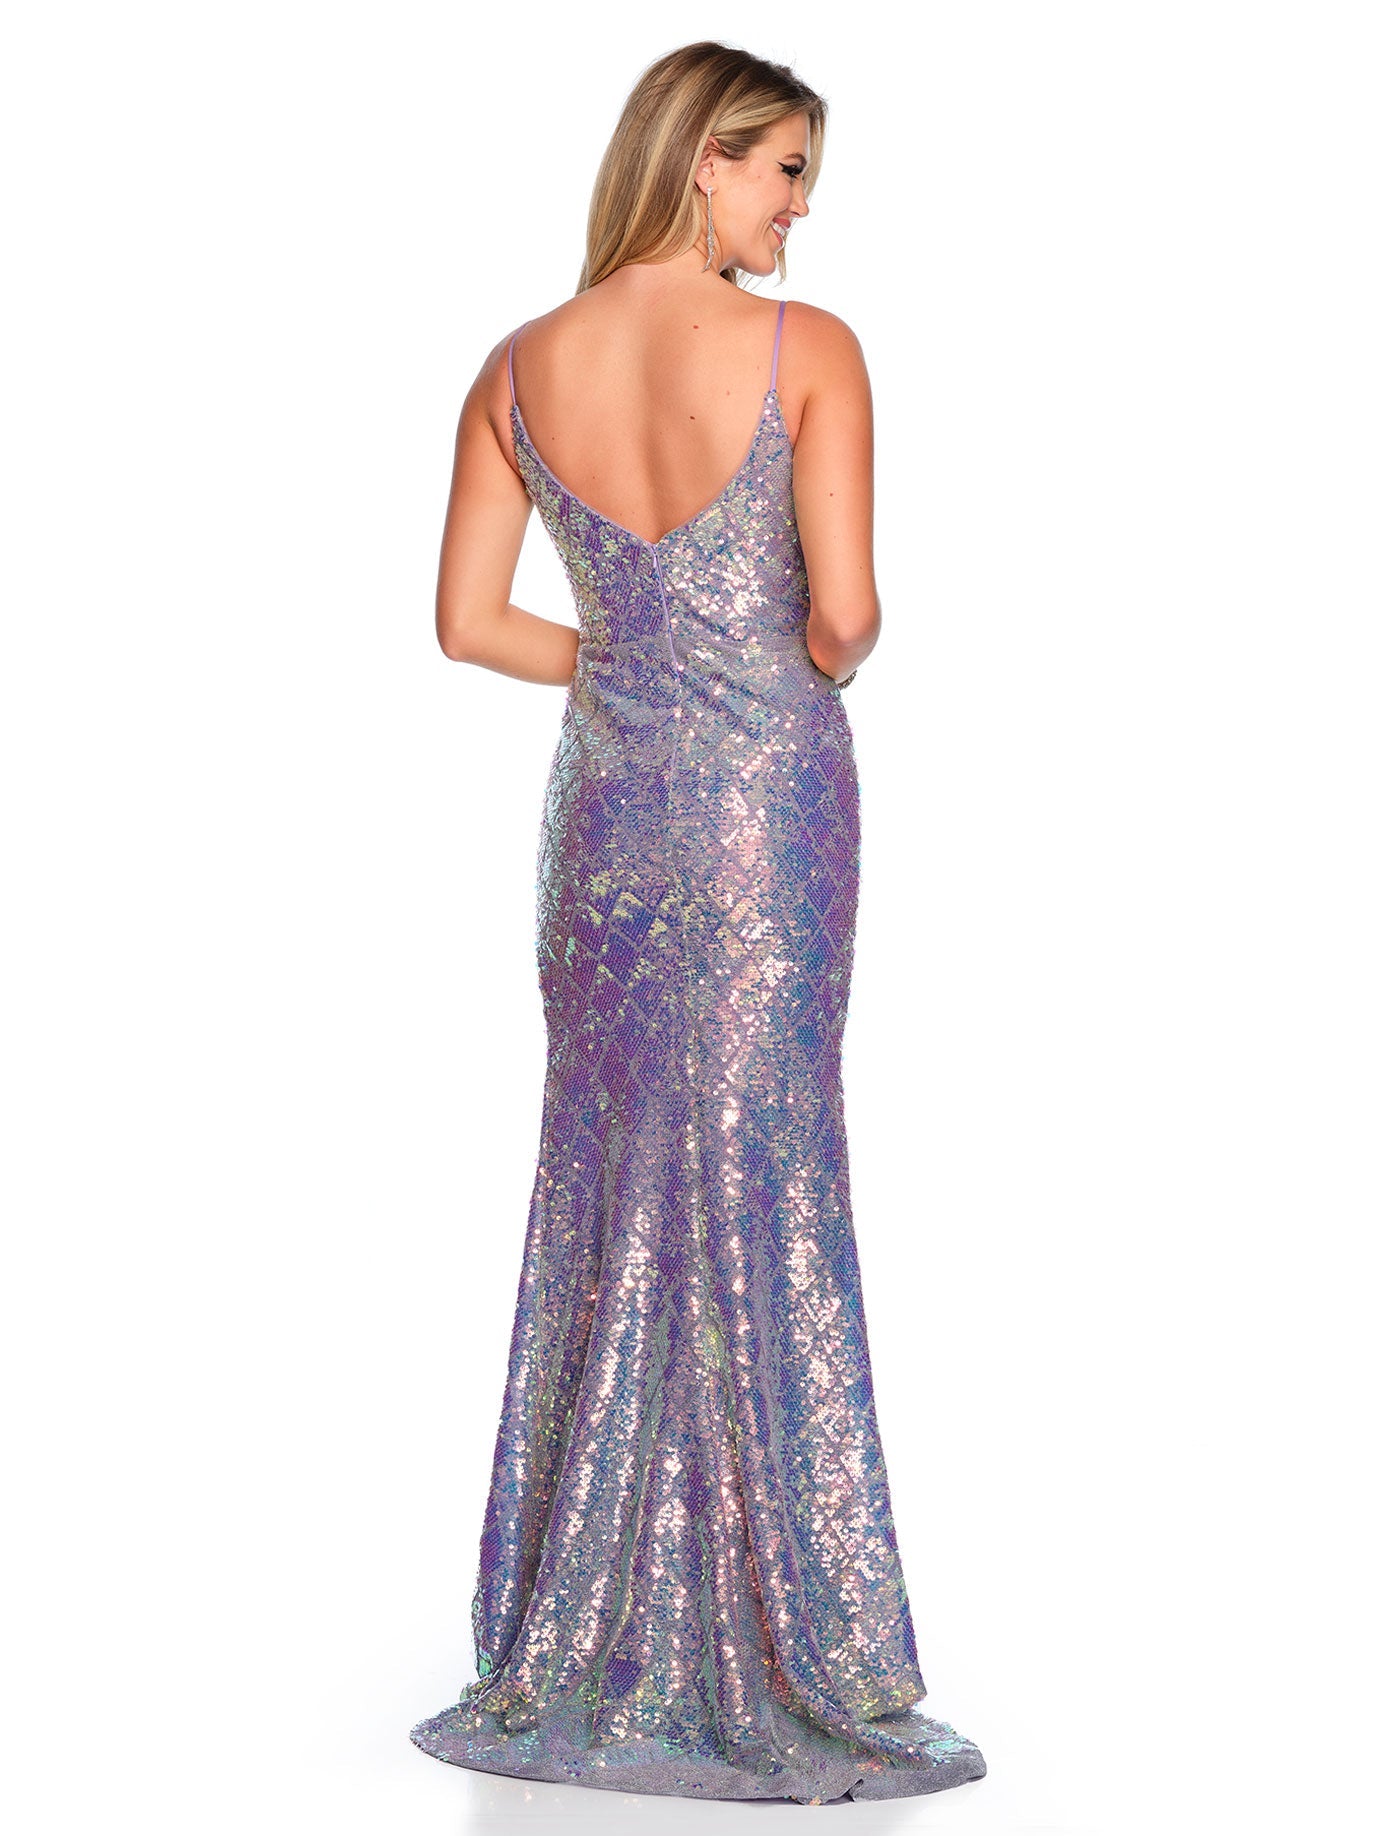 DIAMOND PATTERN FITTED SEQUINS GOWN PLUS SIZE